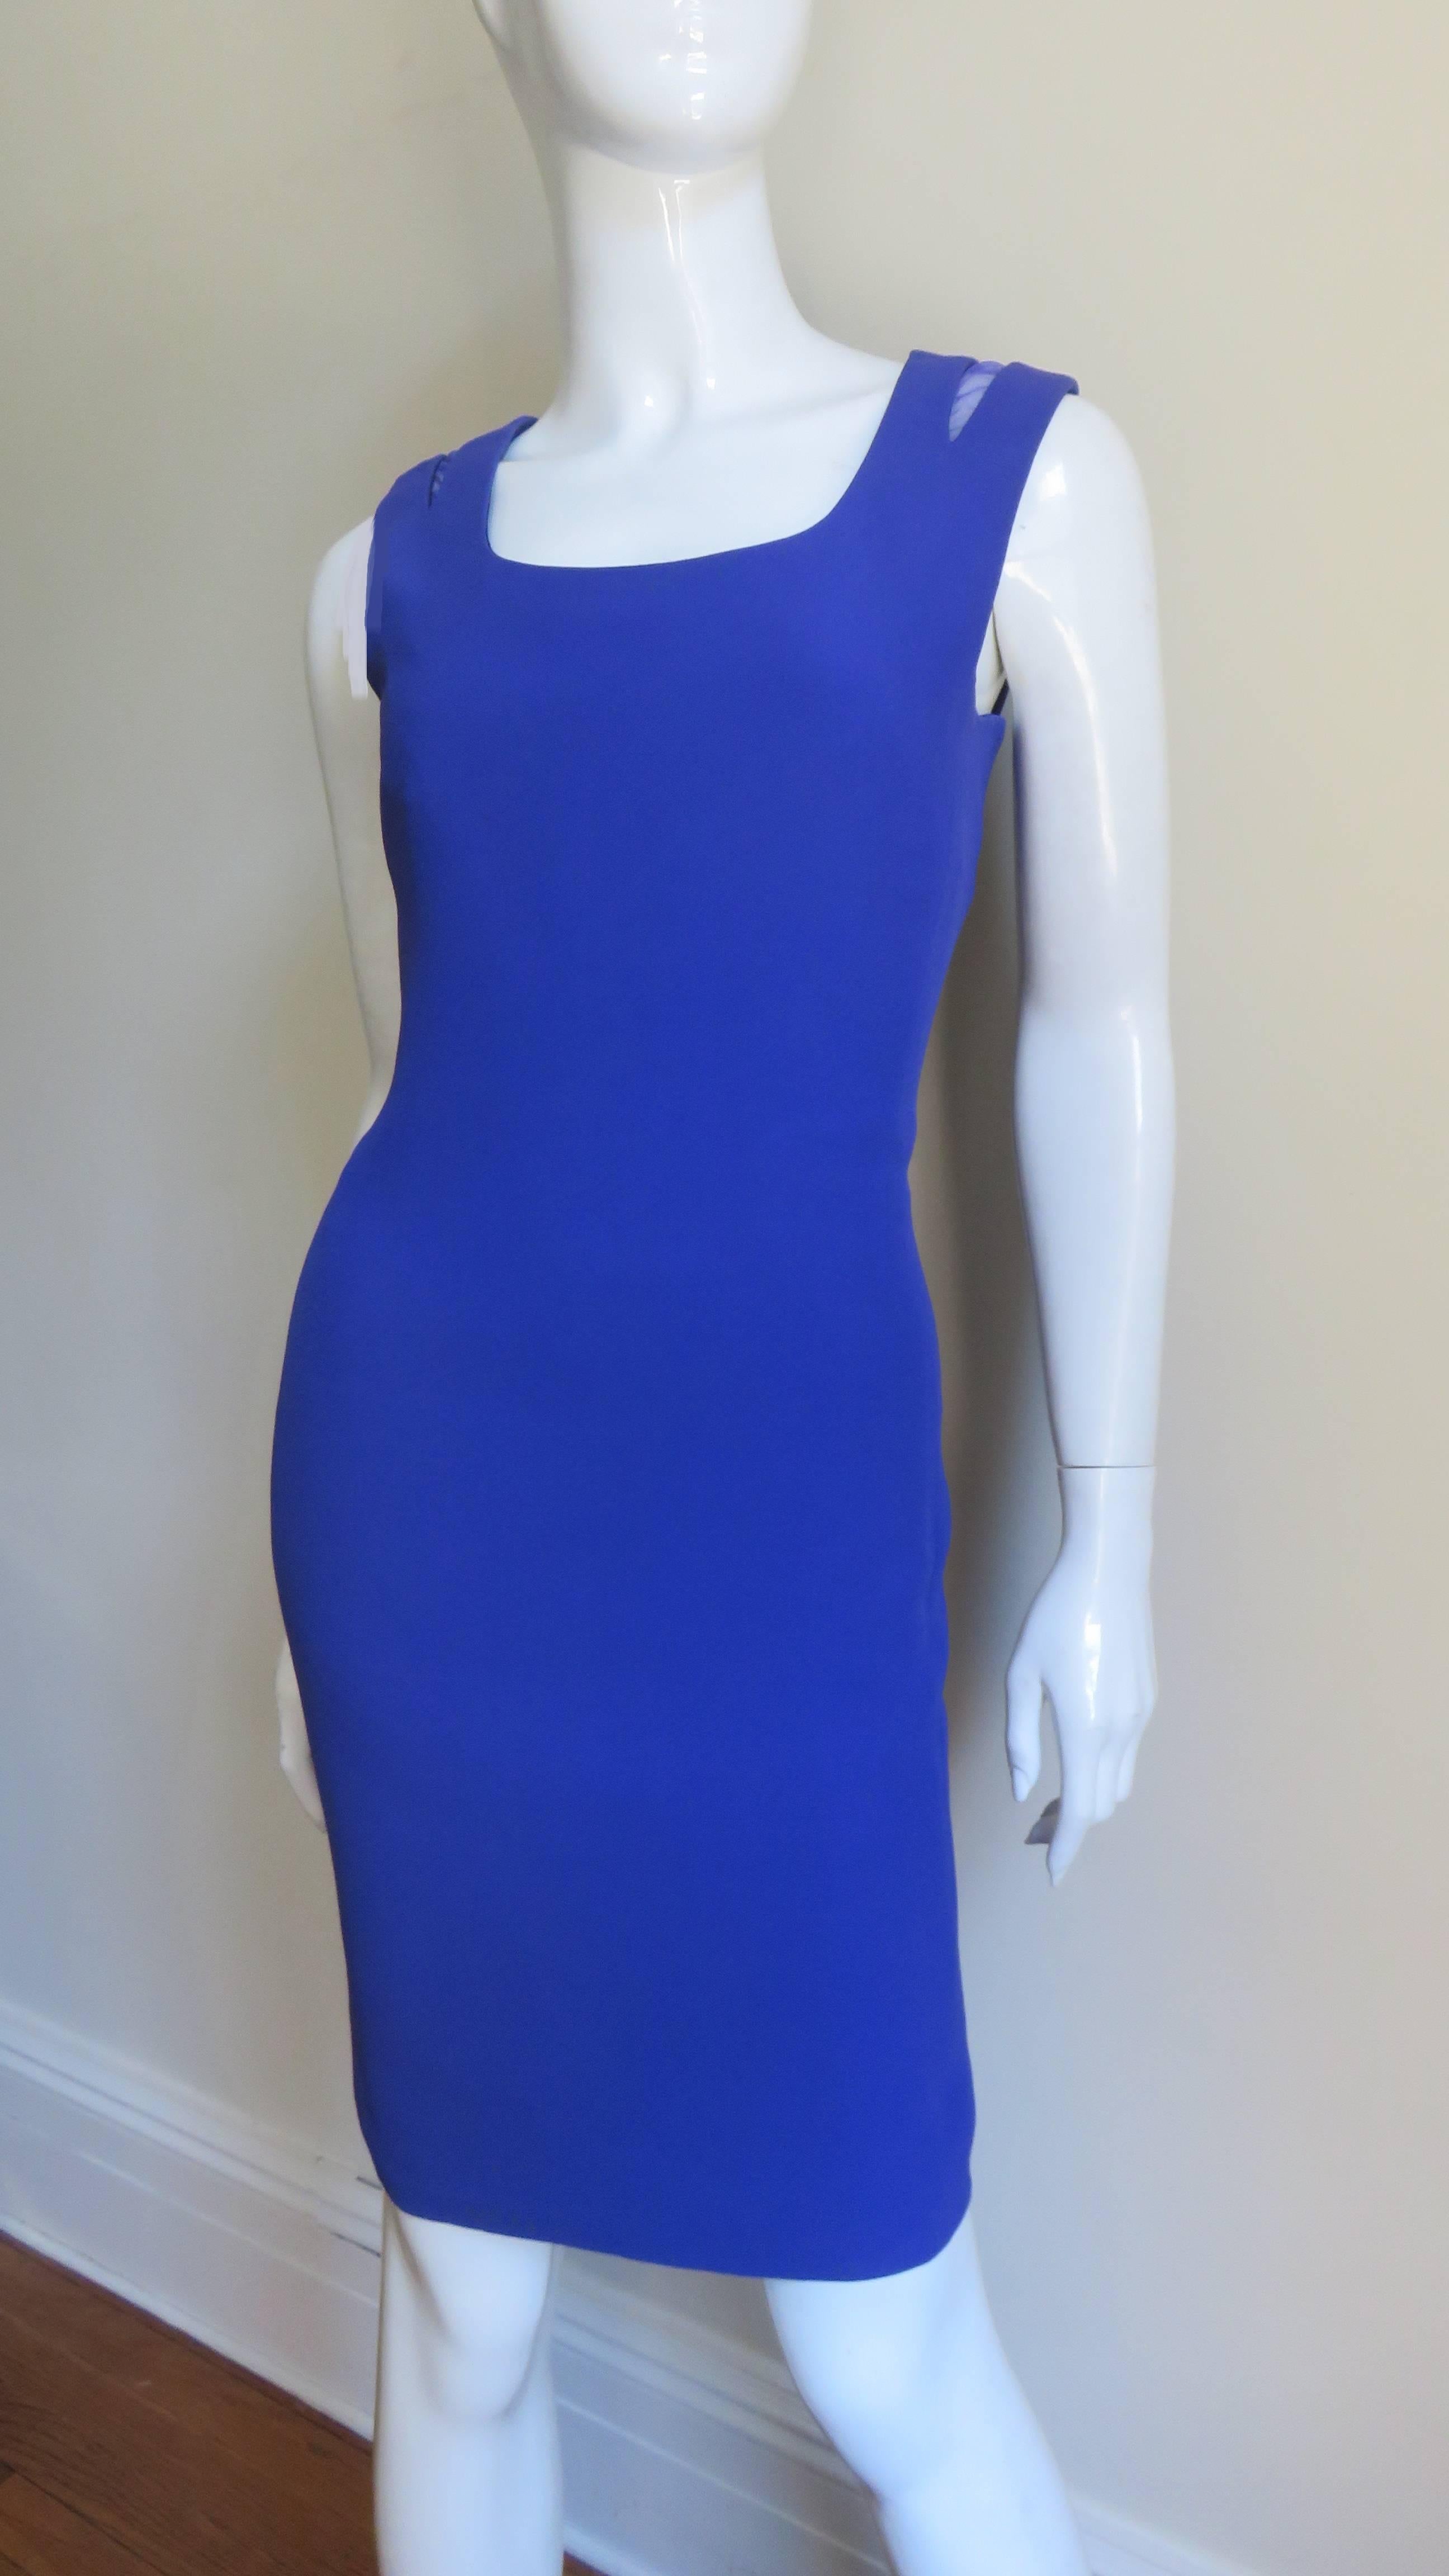 A fabulous purple dress from Gianni Versace Couture. It is semi fitted, sleeveless with a scoop neckline and matching purple mesh insets at the shoulders. The dress is fully lined in purple silk, has inner boned corset for support and a back zipper.